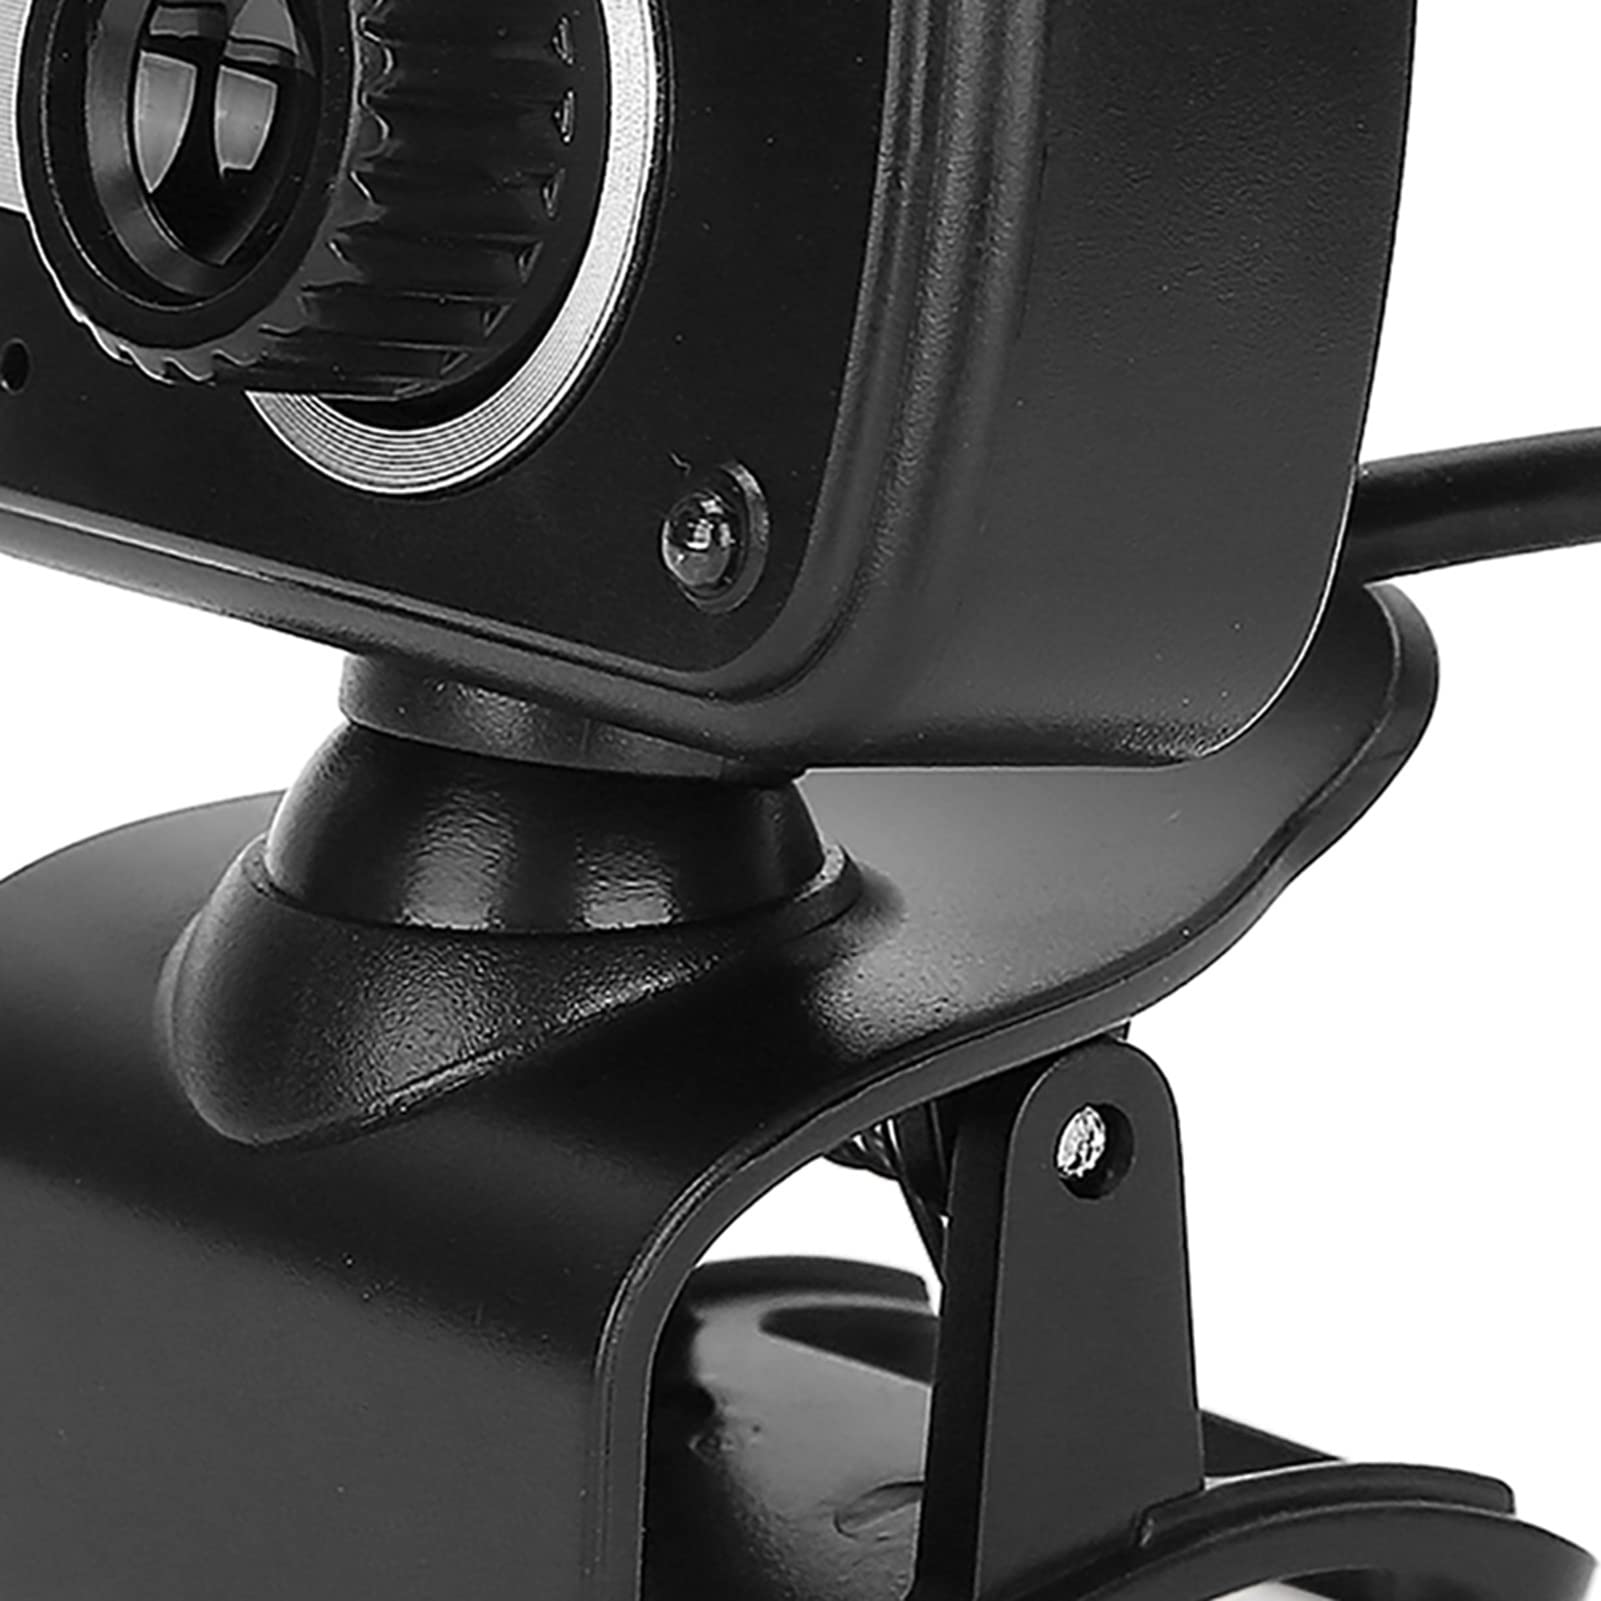 360 Degree USB Webcam with 0.3MP MIC for Laptop/PC/Monitor - High Definition Wireless Camera for MSN/ICQ Night - Perfect USB Camera for Computer, Laptop and More